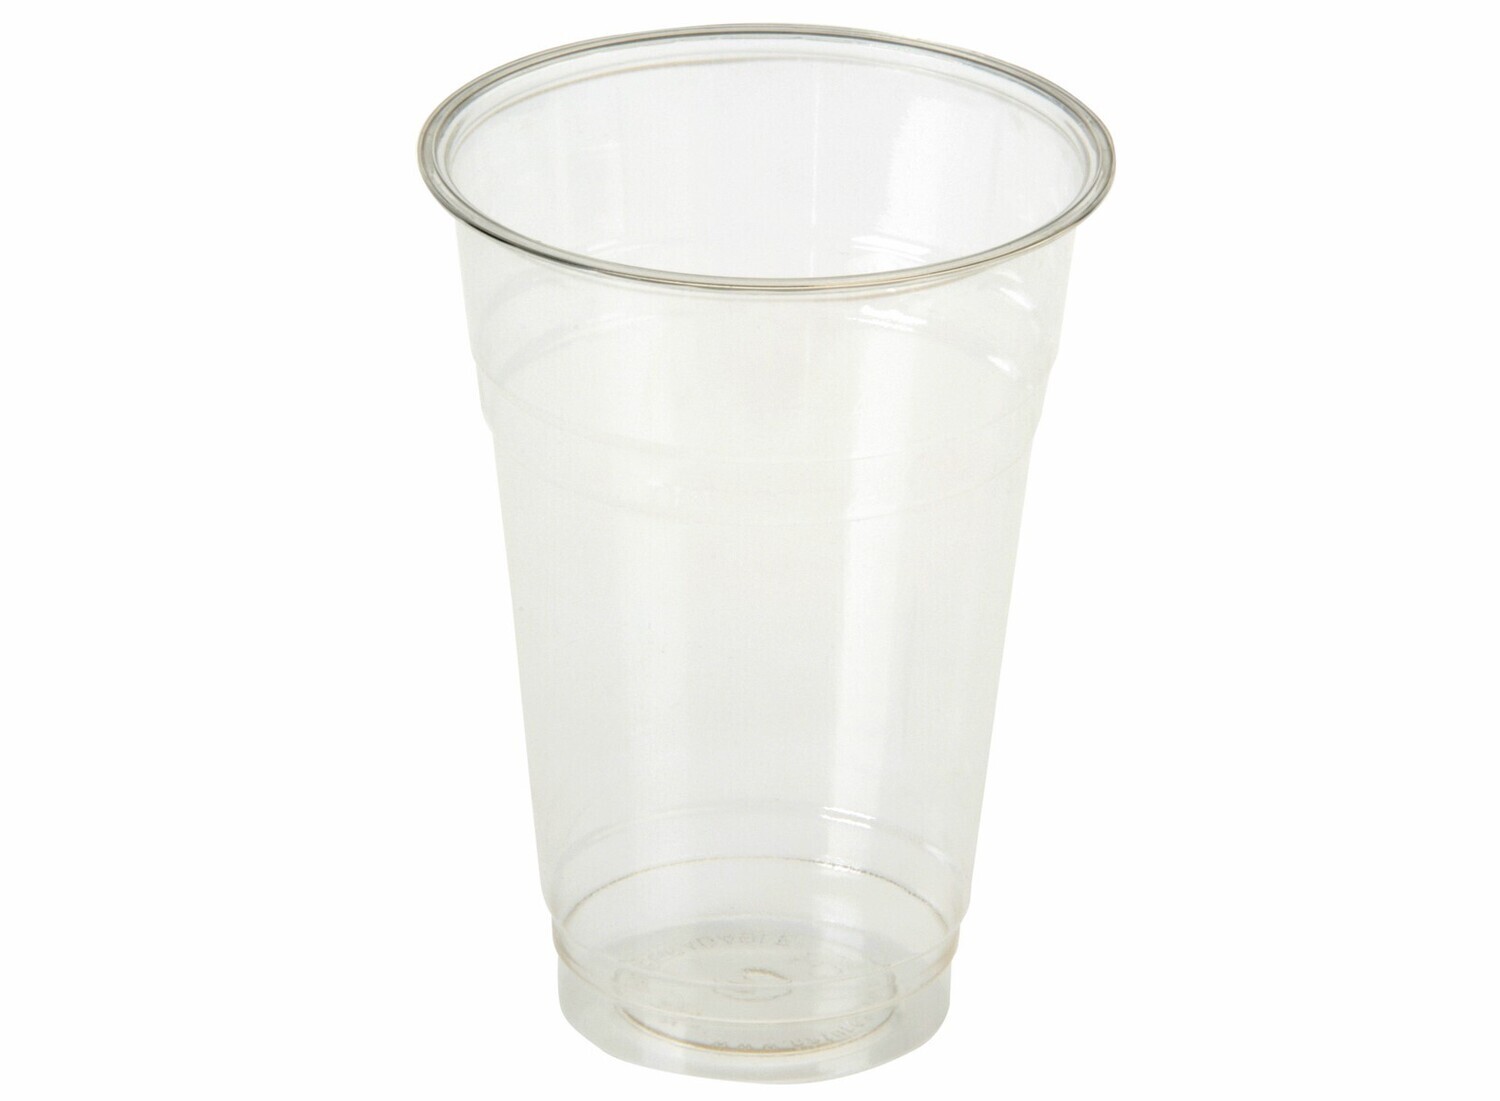 Drinking glass - 4dl calibrated